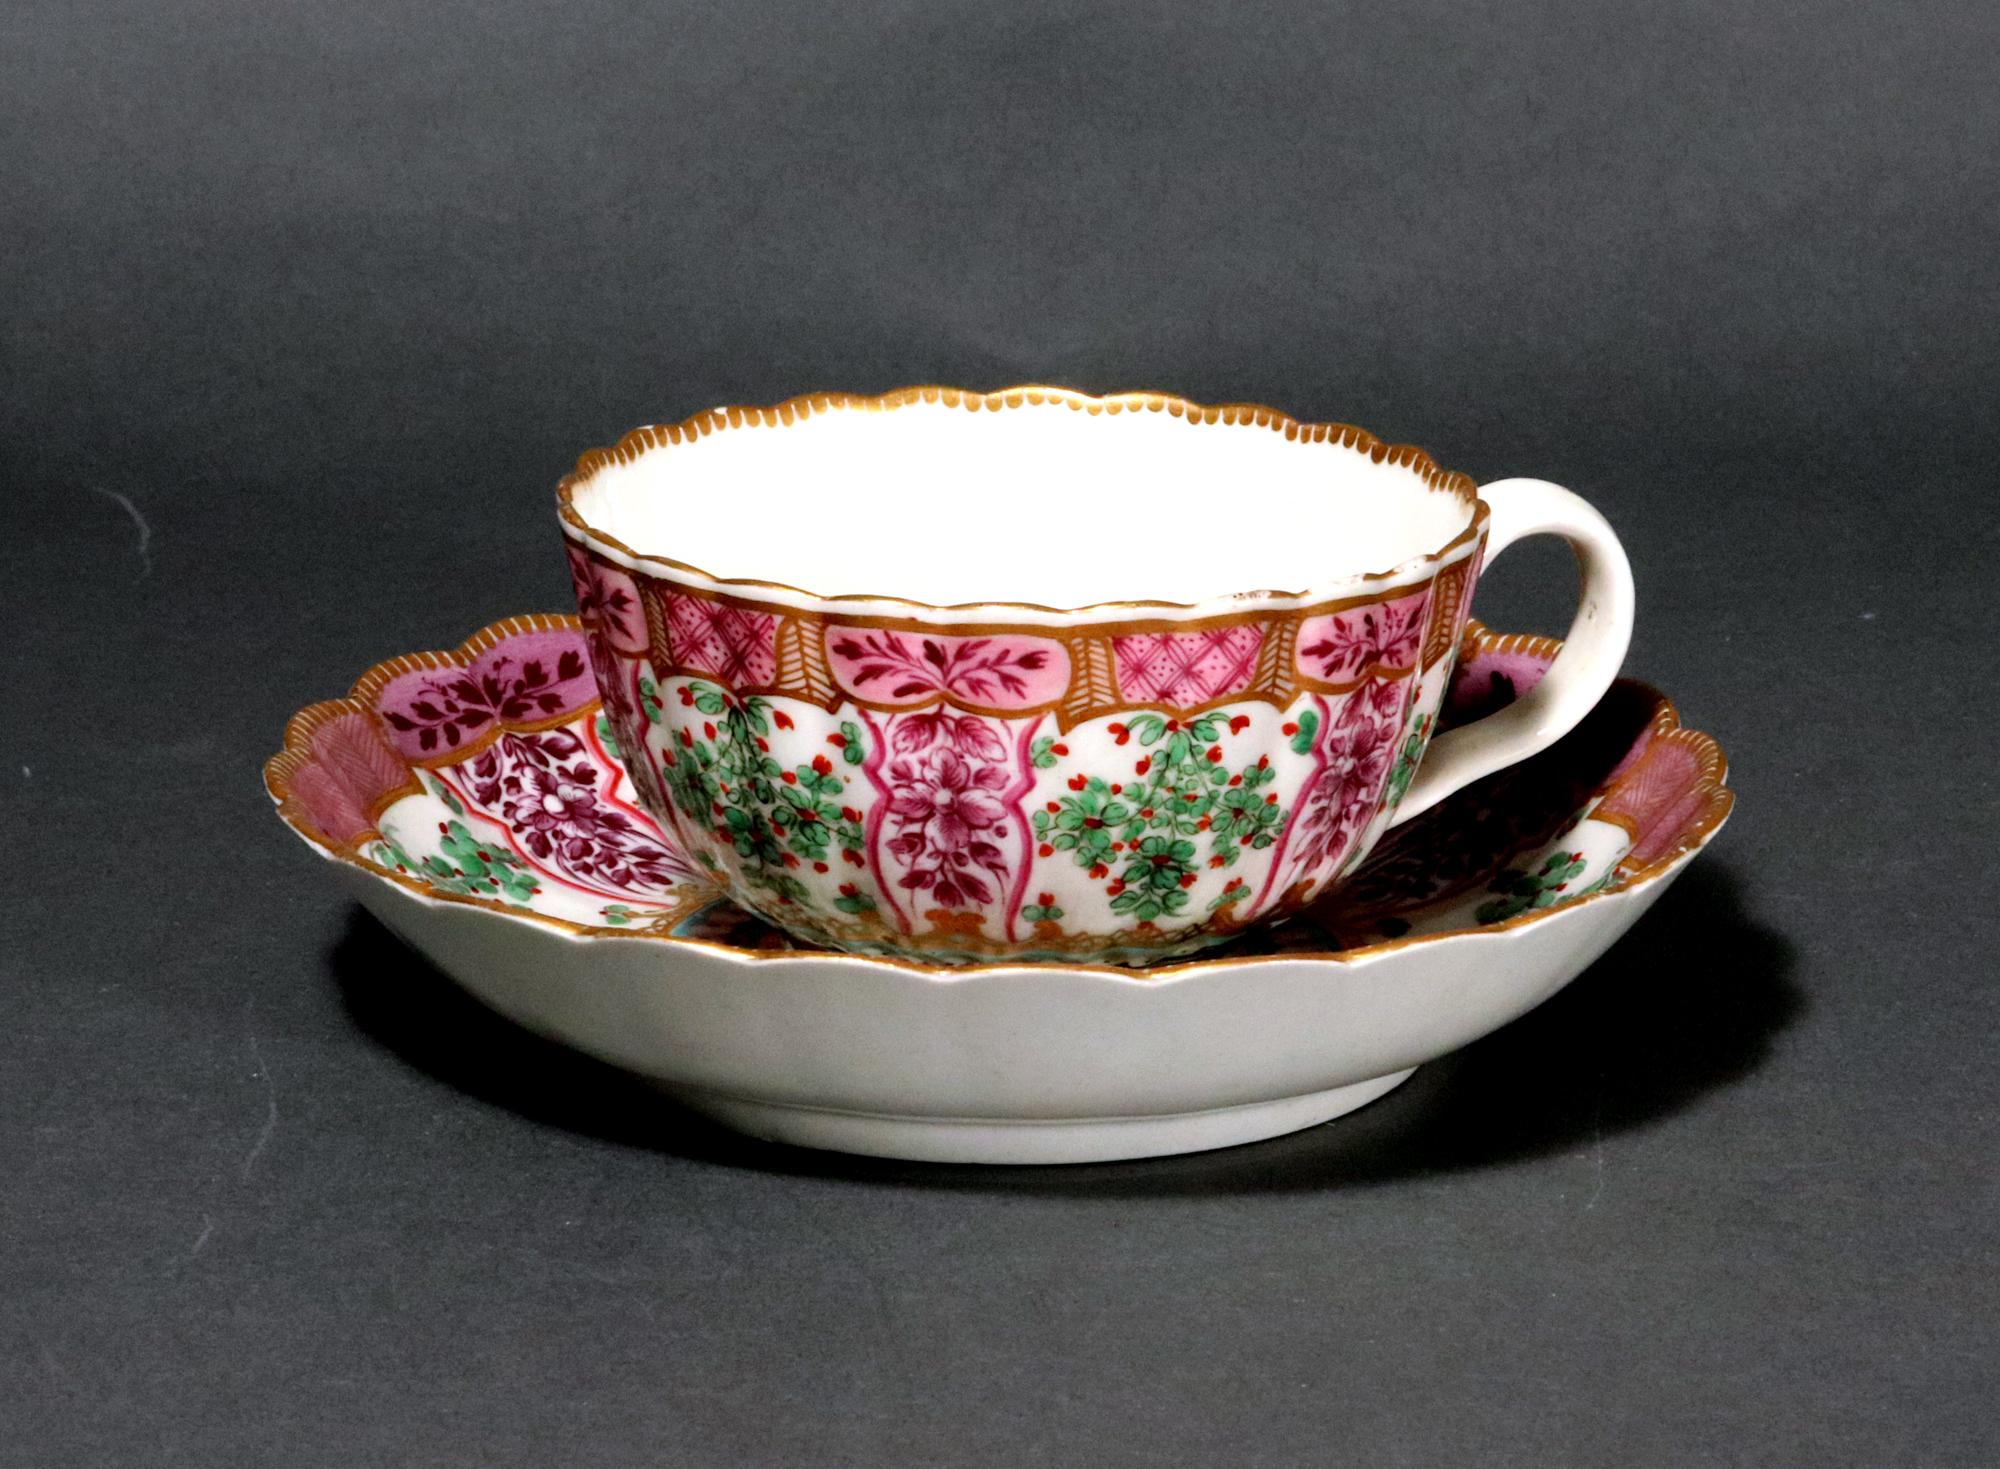 First Period Worcester Porcelain Holly Berry Pattern Teacup and Saucer, Hop Trellis Pattern, 
Circa 1775.

The First Period Worcester porcelain teacup and saucer has a reeded French shape and is richly decorated with the Holly Berry pattern- a